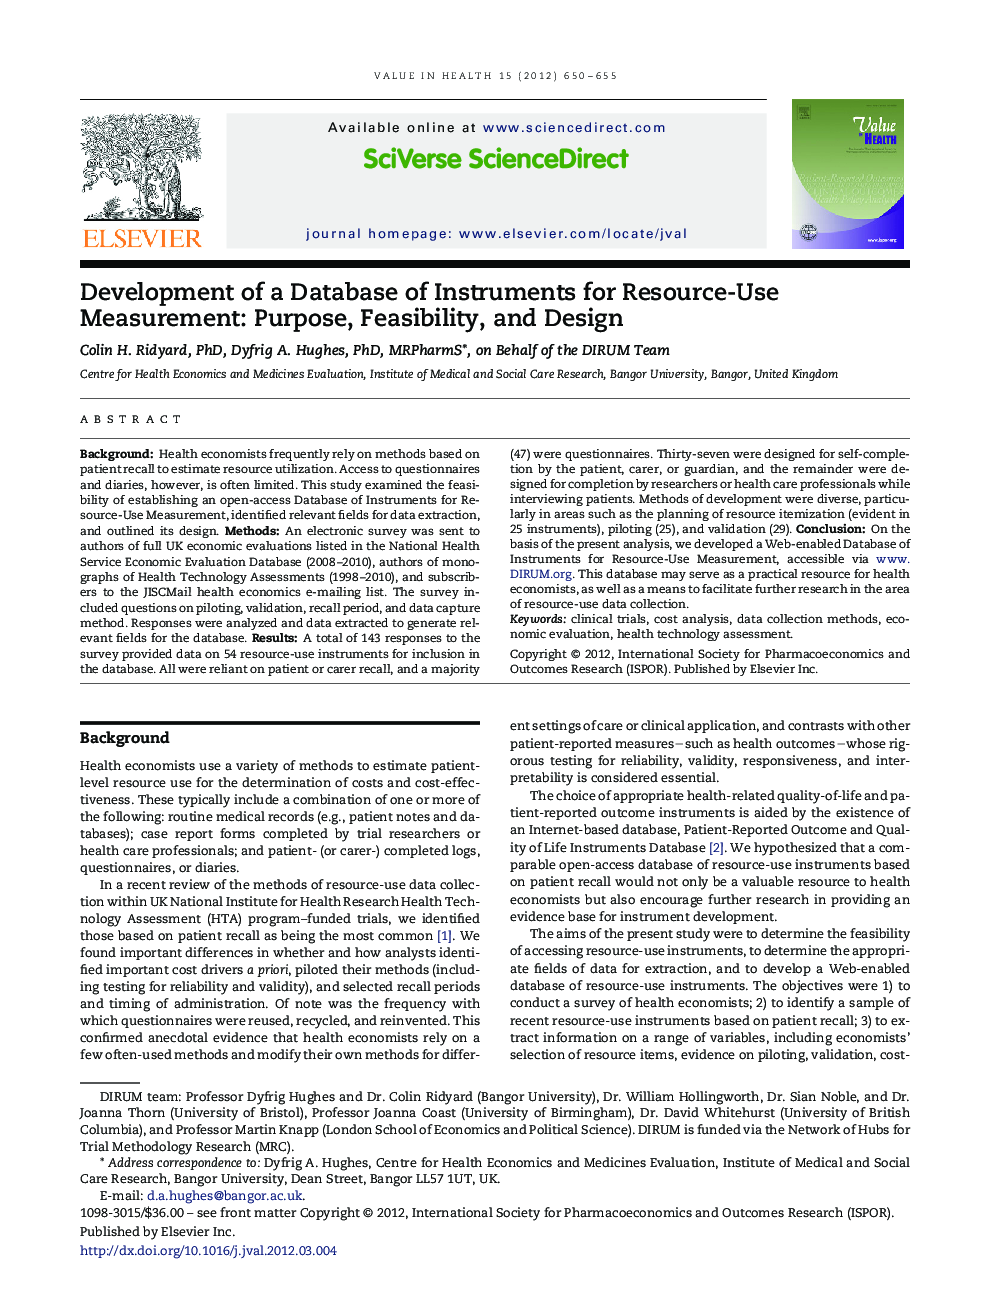 Development of a Database of Instruments for Resource-Use Measurement: Purpose, Feasibility, and Design